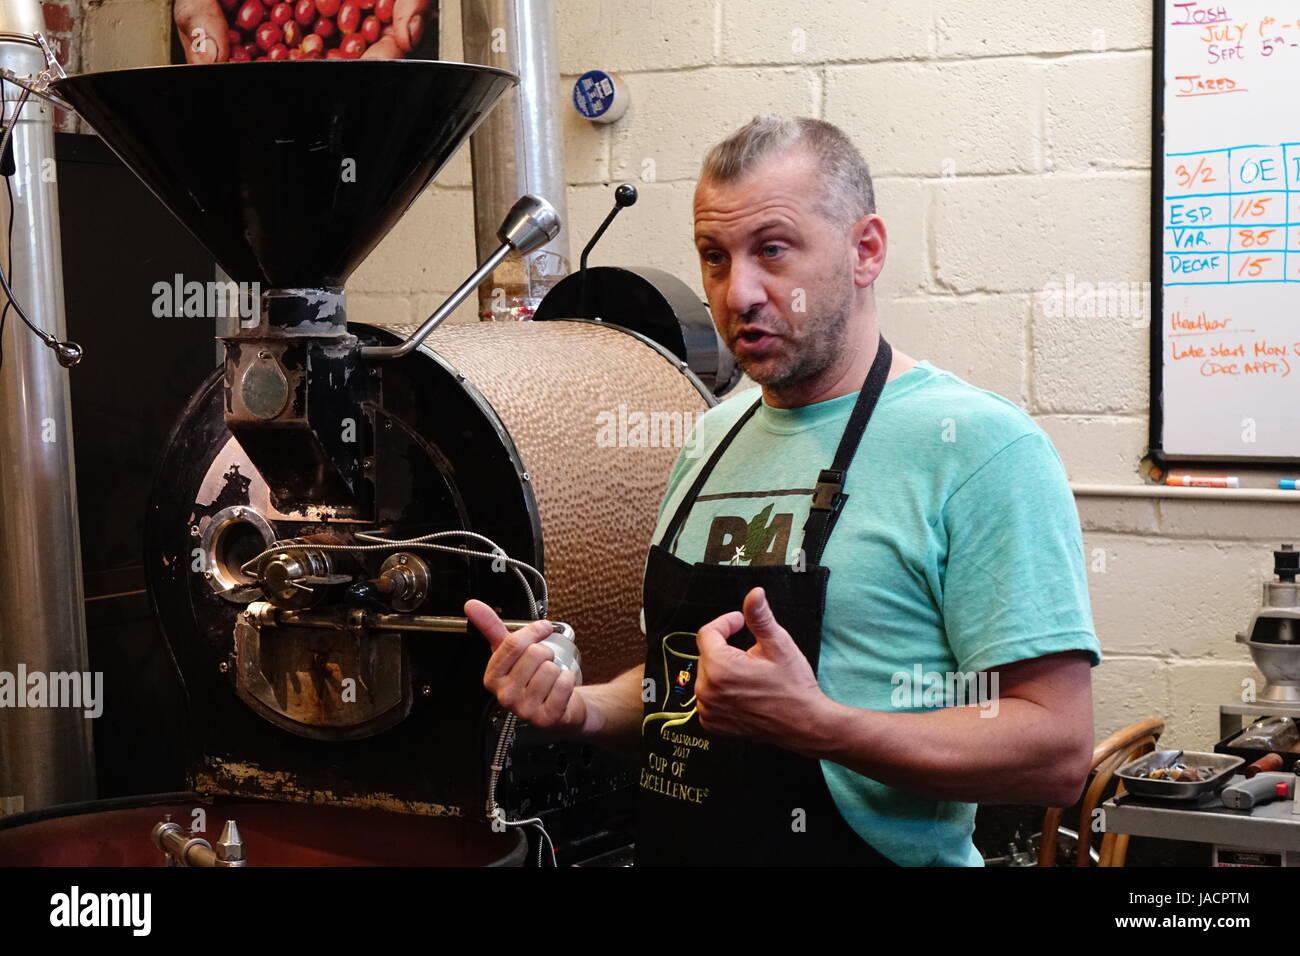 https://c8.alamy.com/comp/JACPTM/scott-cornary-owner-of-carrboro-coffee-rosters-and-the-open-eye-caf-JACPTM.jpg